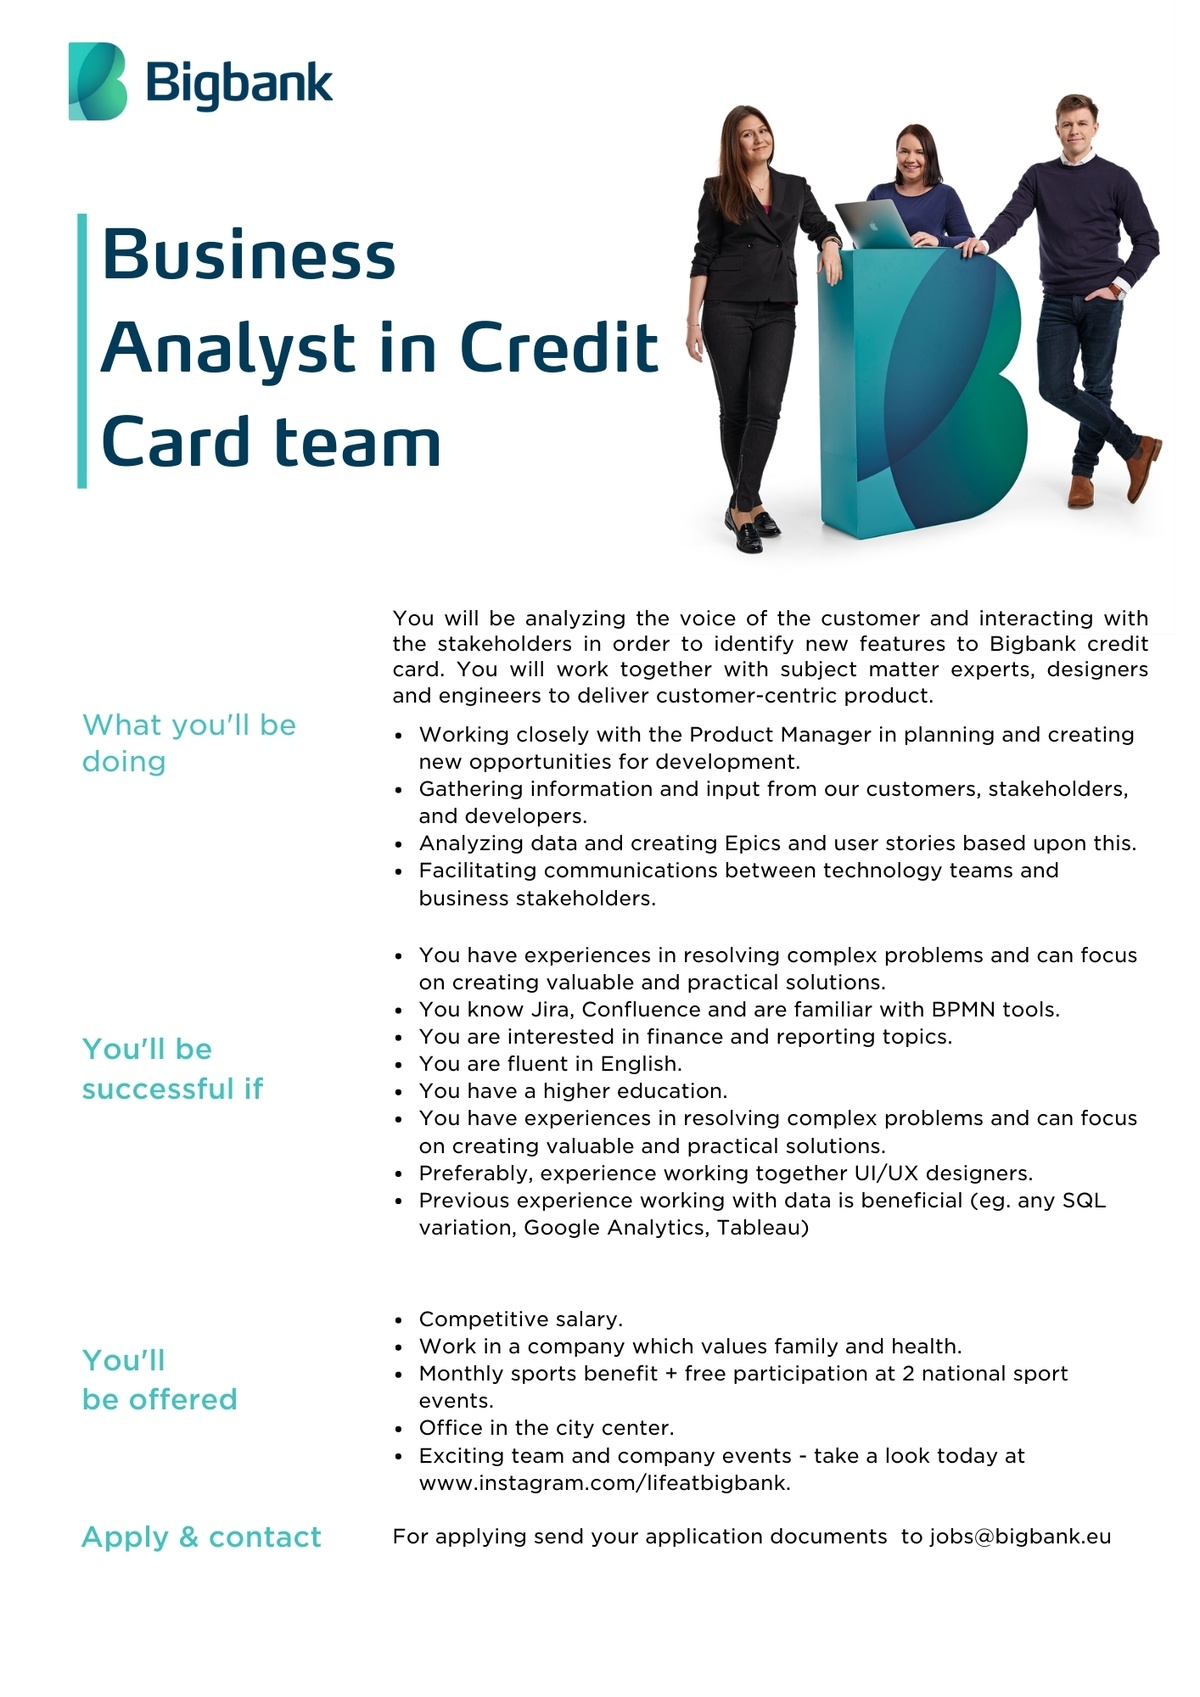 BIGBANK AS Business Analyst in Credit Card team